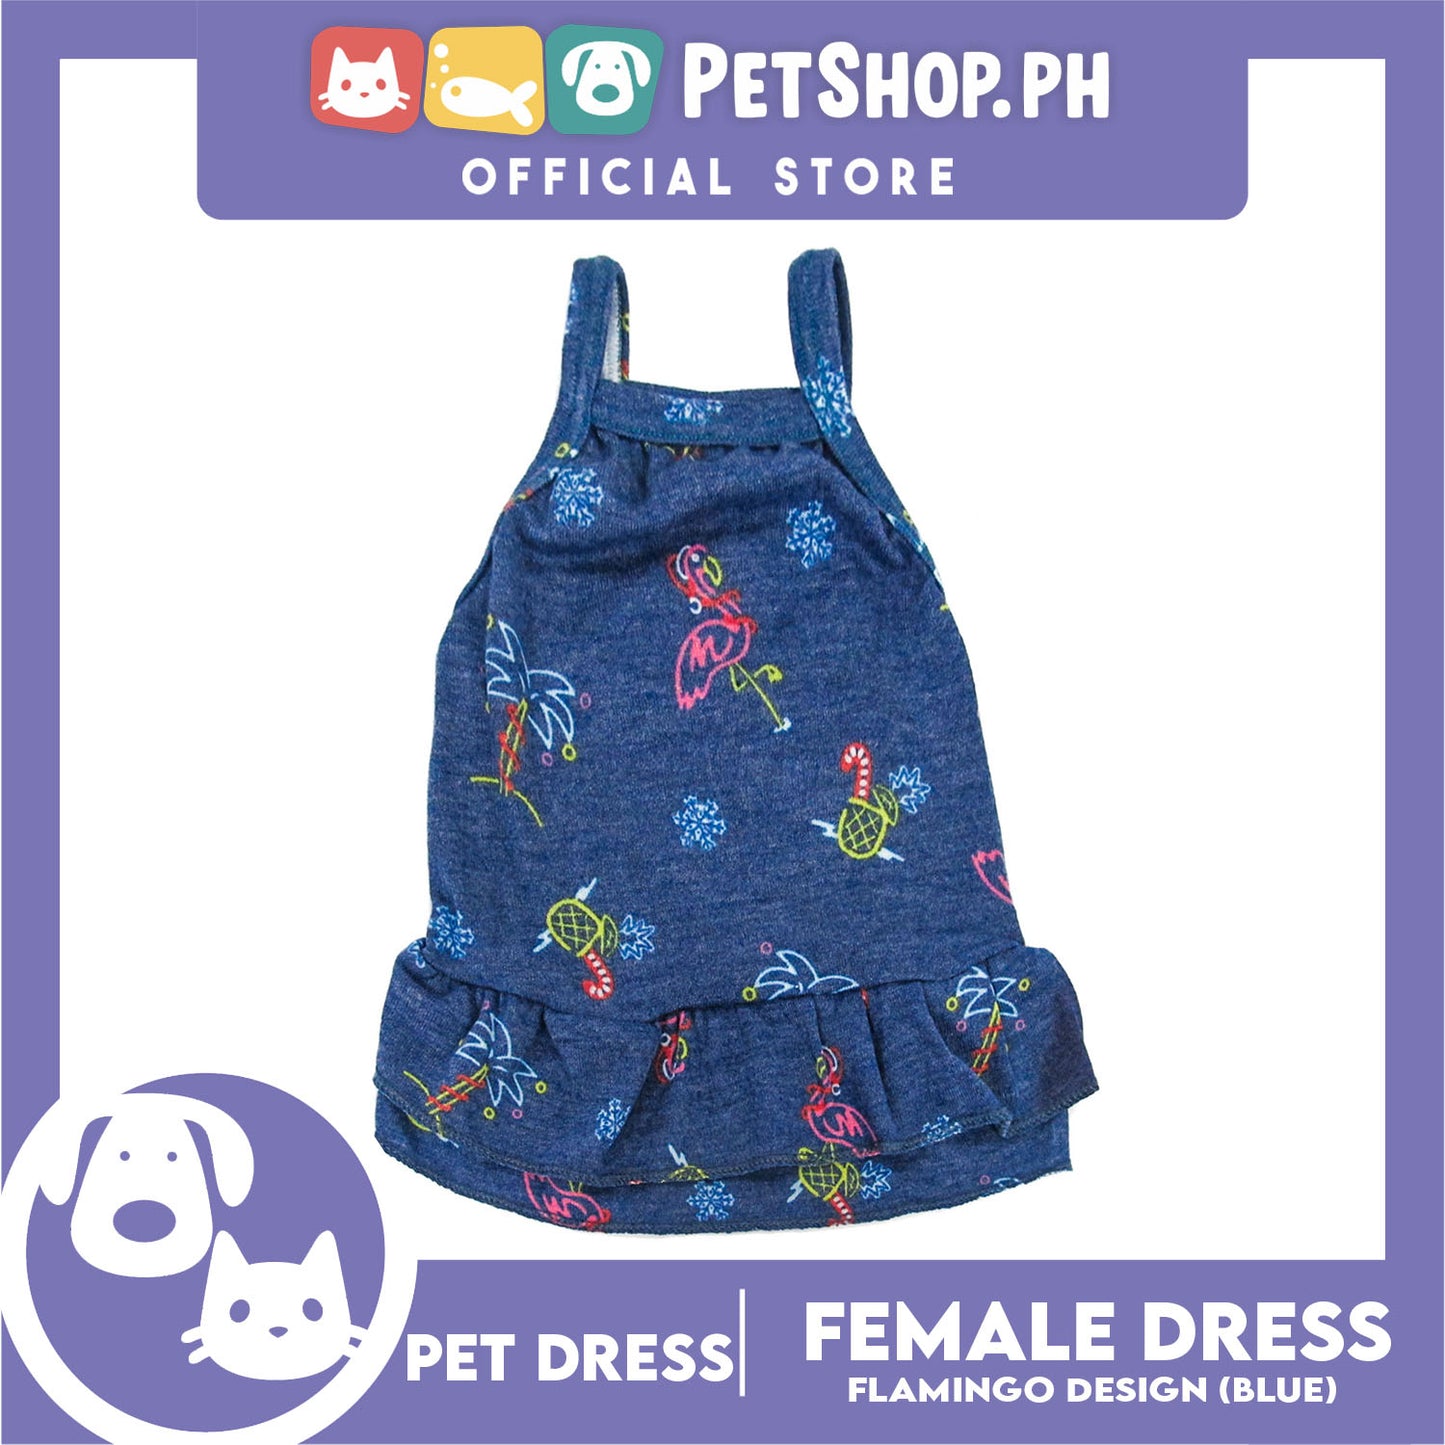 Pet Dress Flamingo Design Skirt Blue (Large) Perfect fit for Small Breed Dogs and Cats